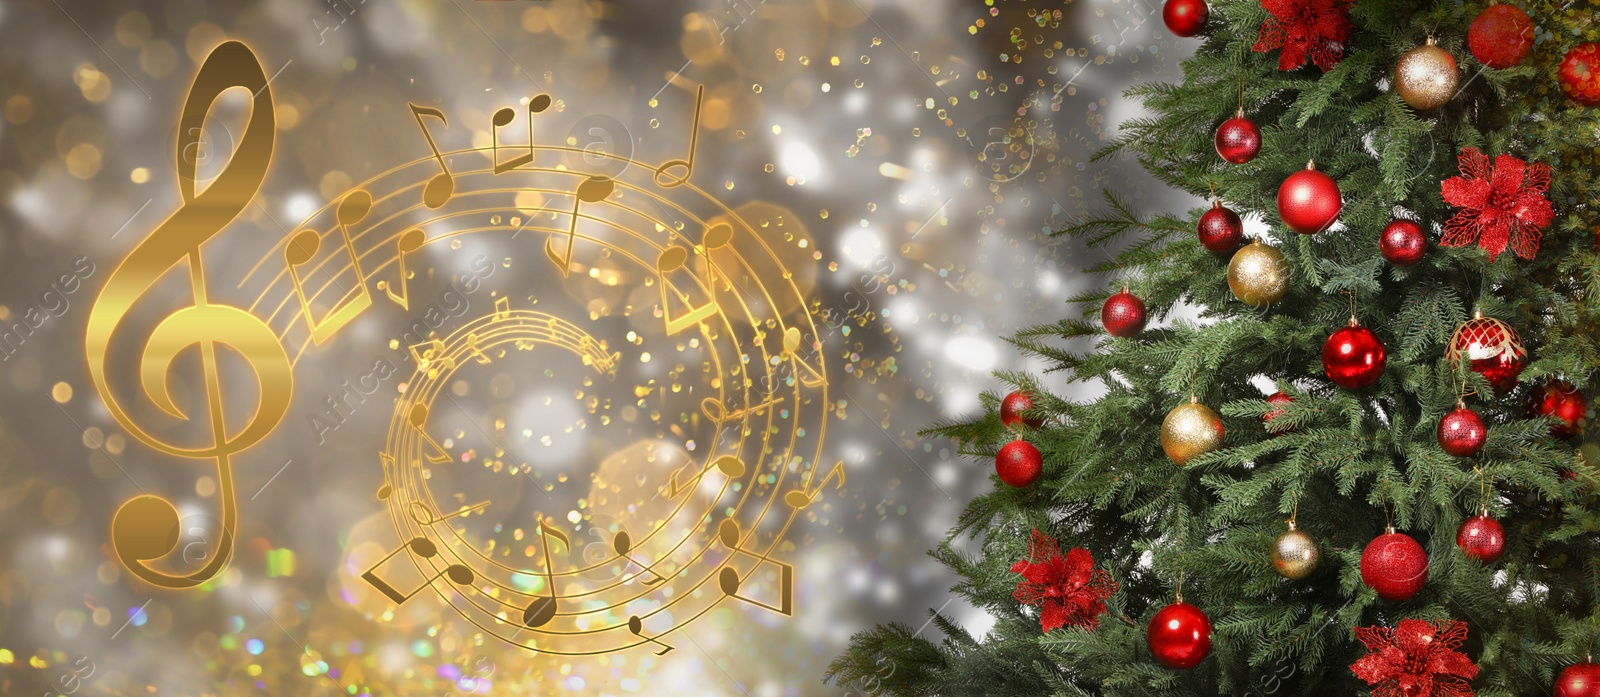 Image of Music notes swirling near Christmas tree on blurred background, bokeh effect. Banner design